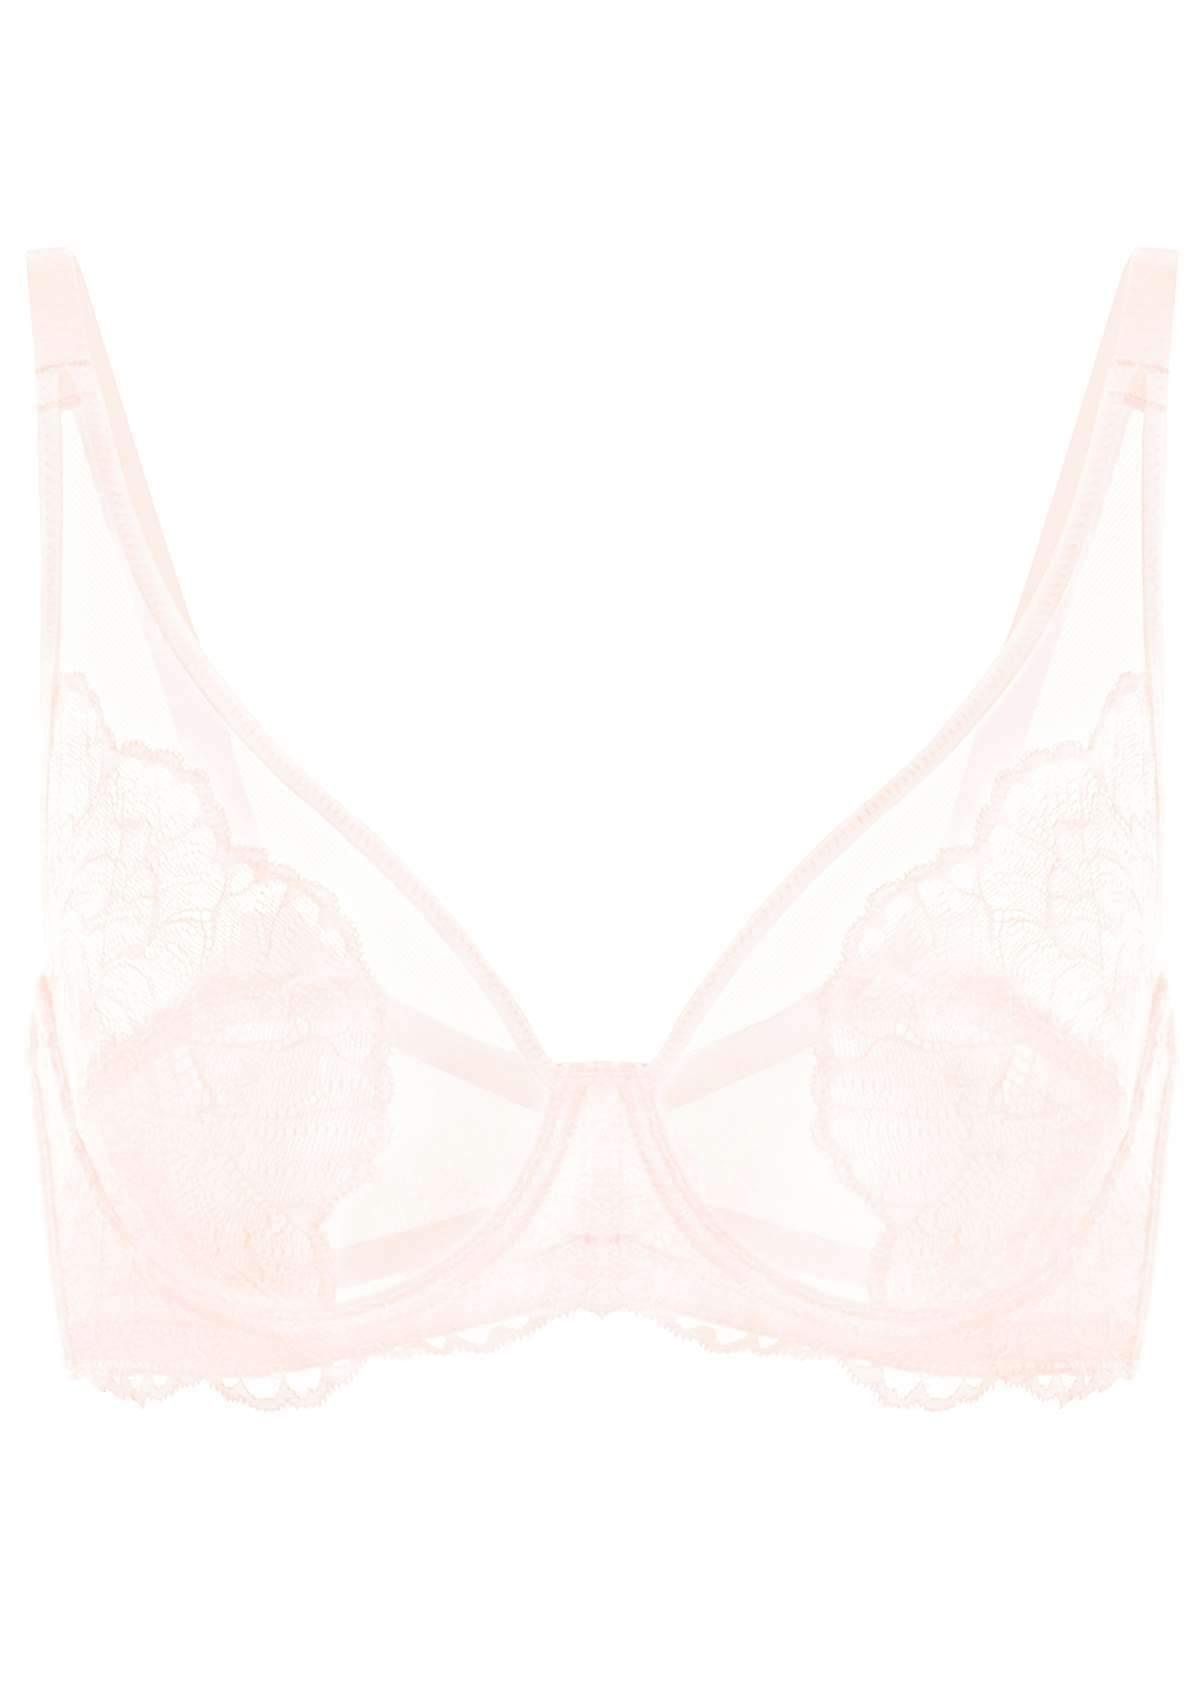 HSIA Blossom Sheer Lace Bra: Comfortable Underwire Bra For Big Busts - White / 46 / D